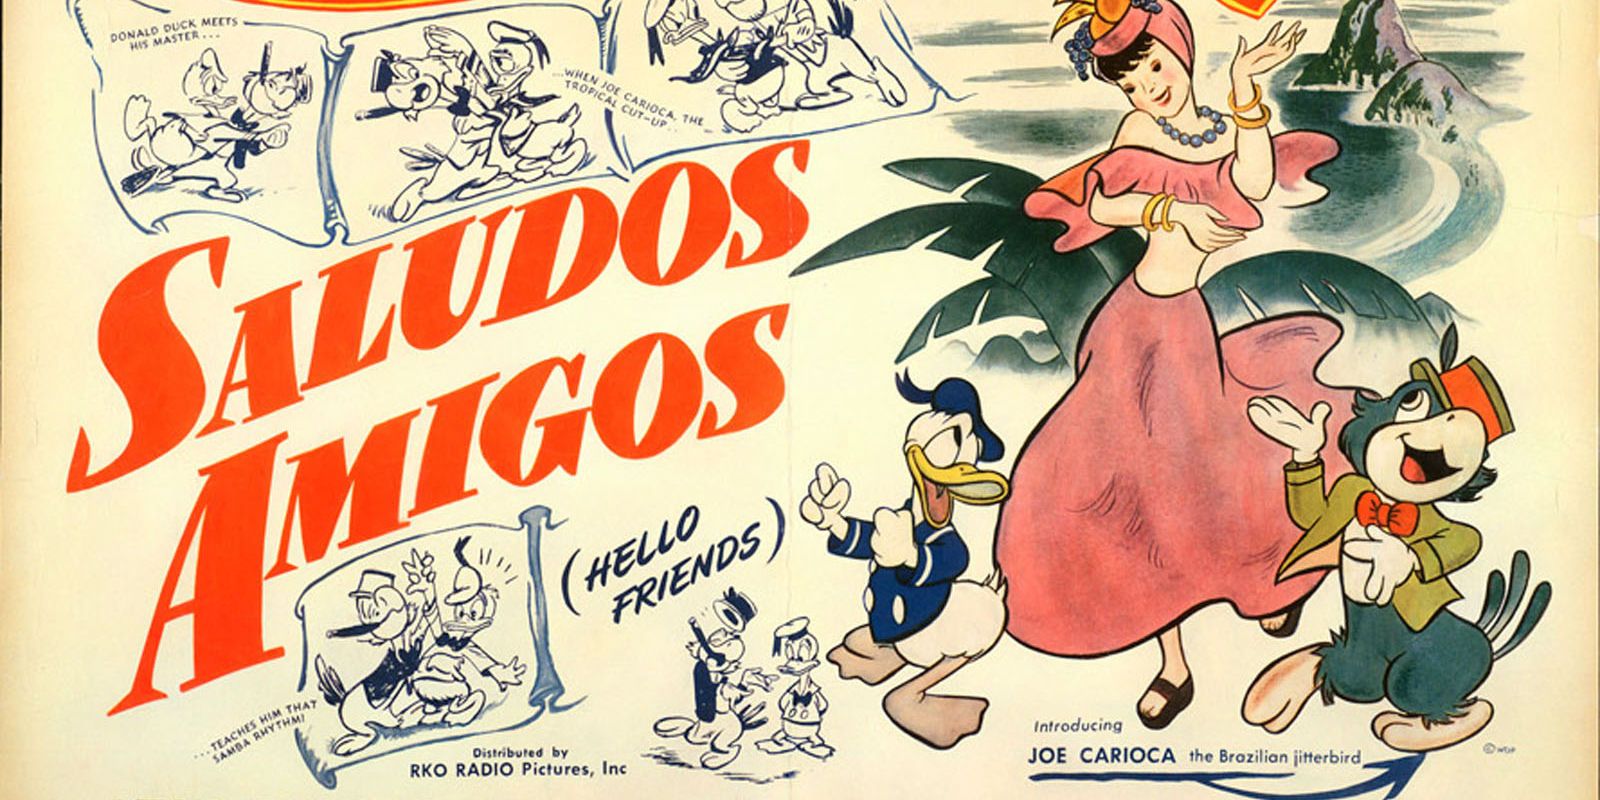 The Saludos Amigos poster has Donald Duck on it. 